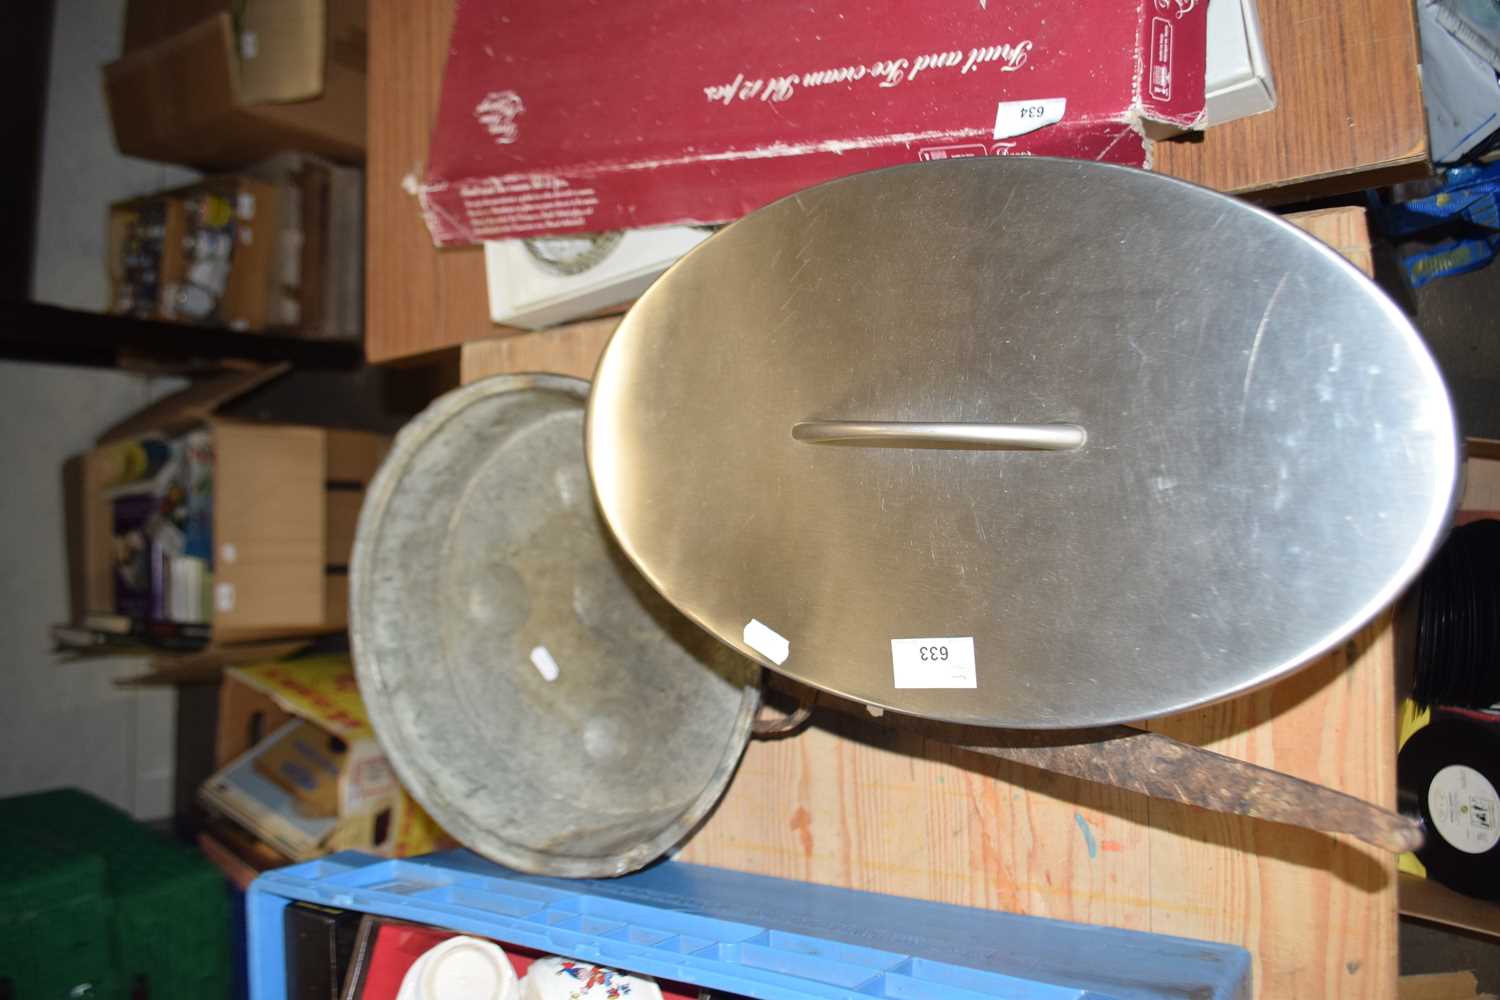 Large copper pan and a stainless steel bread bin